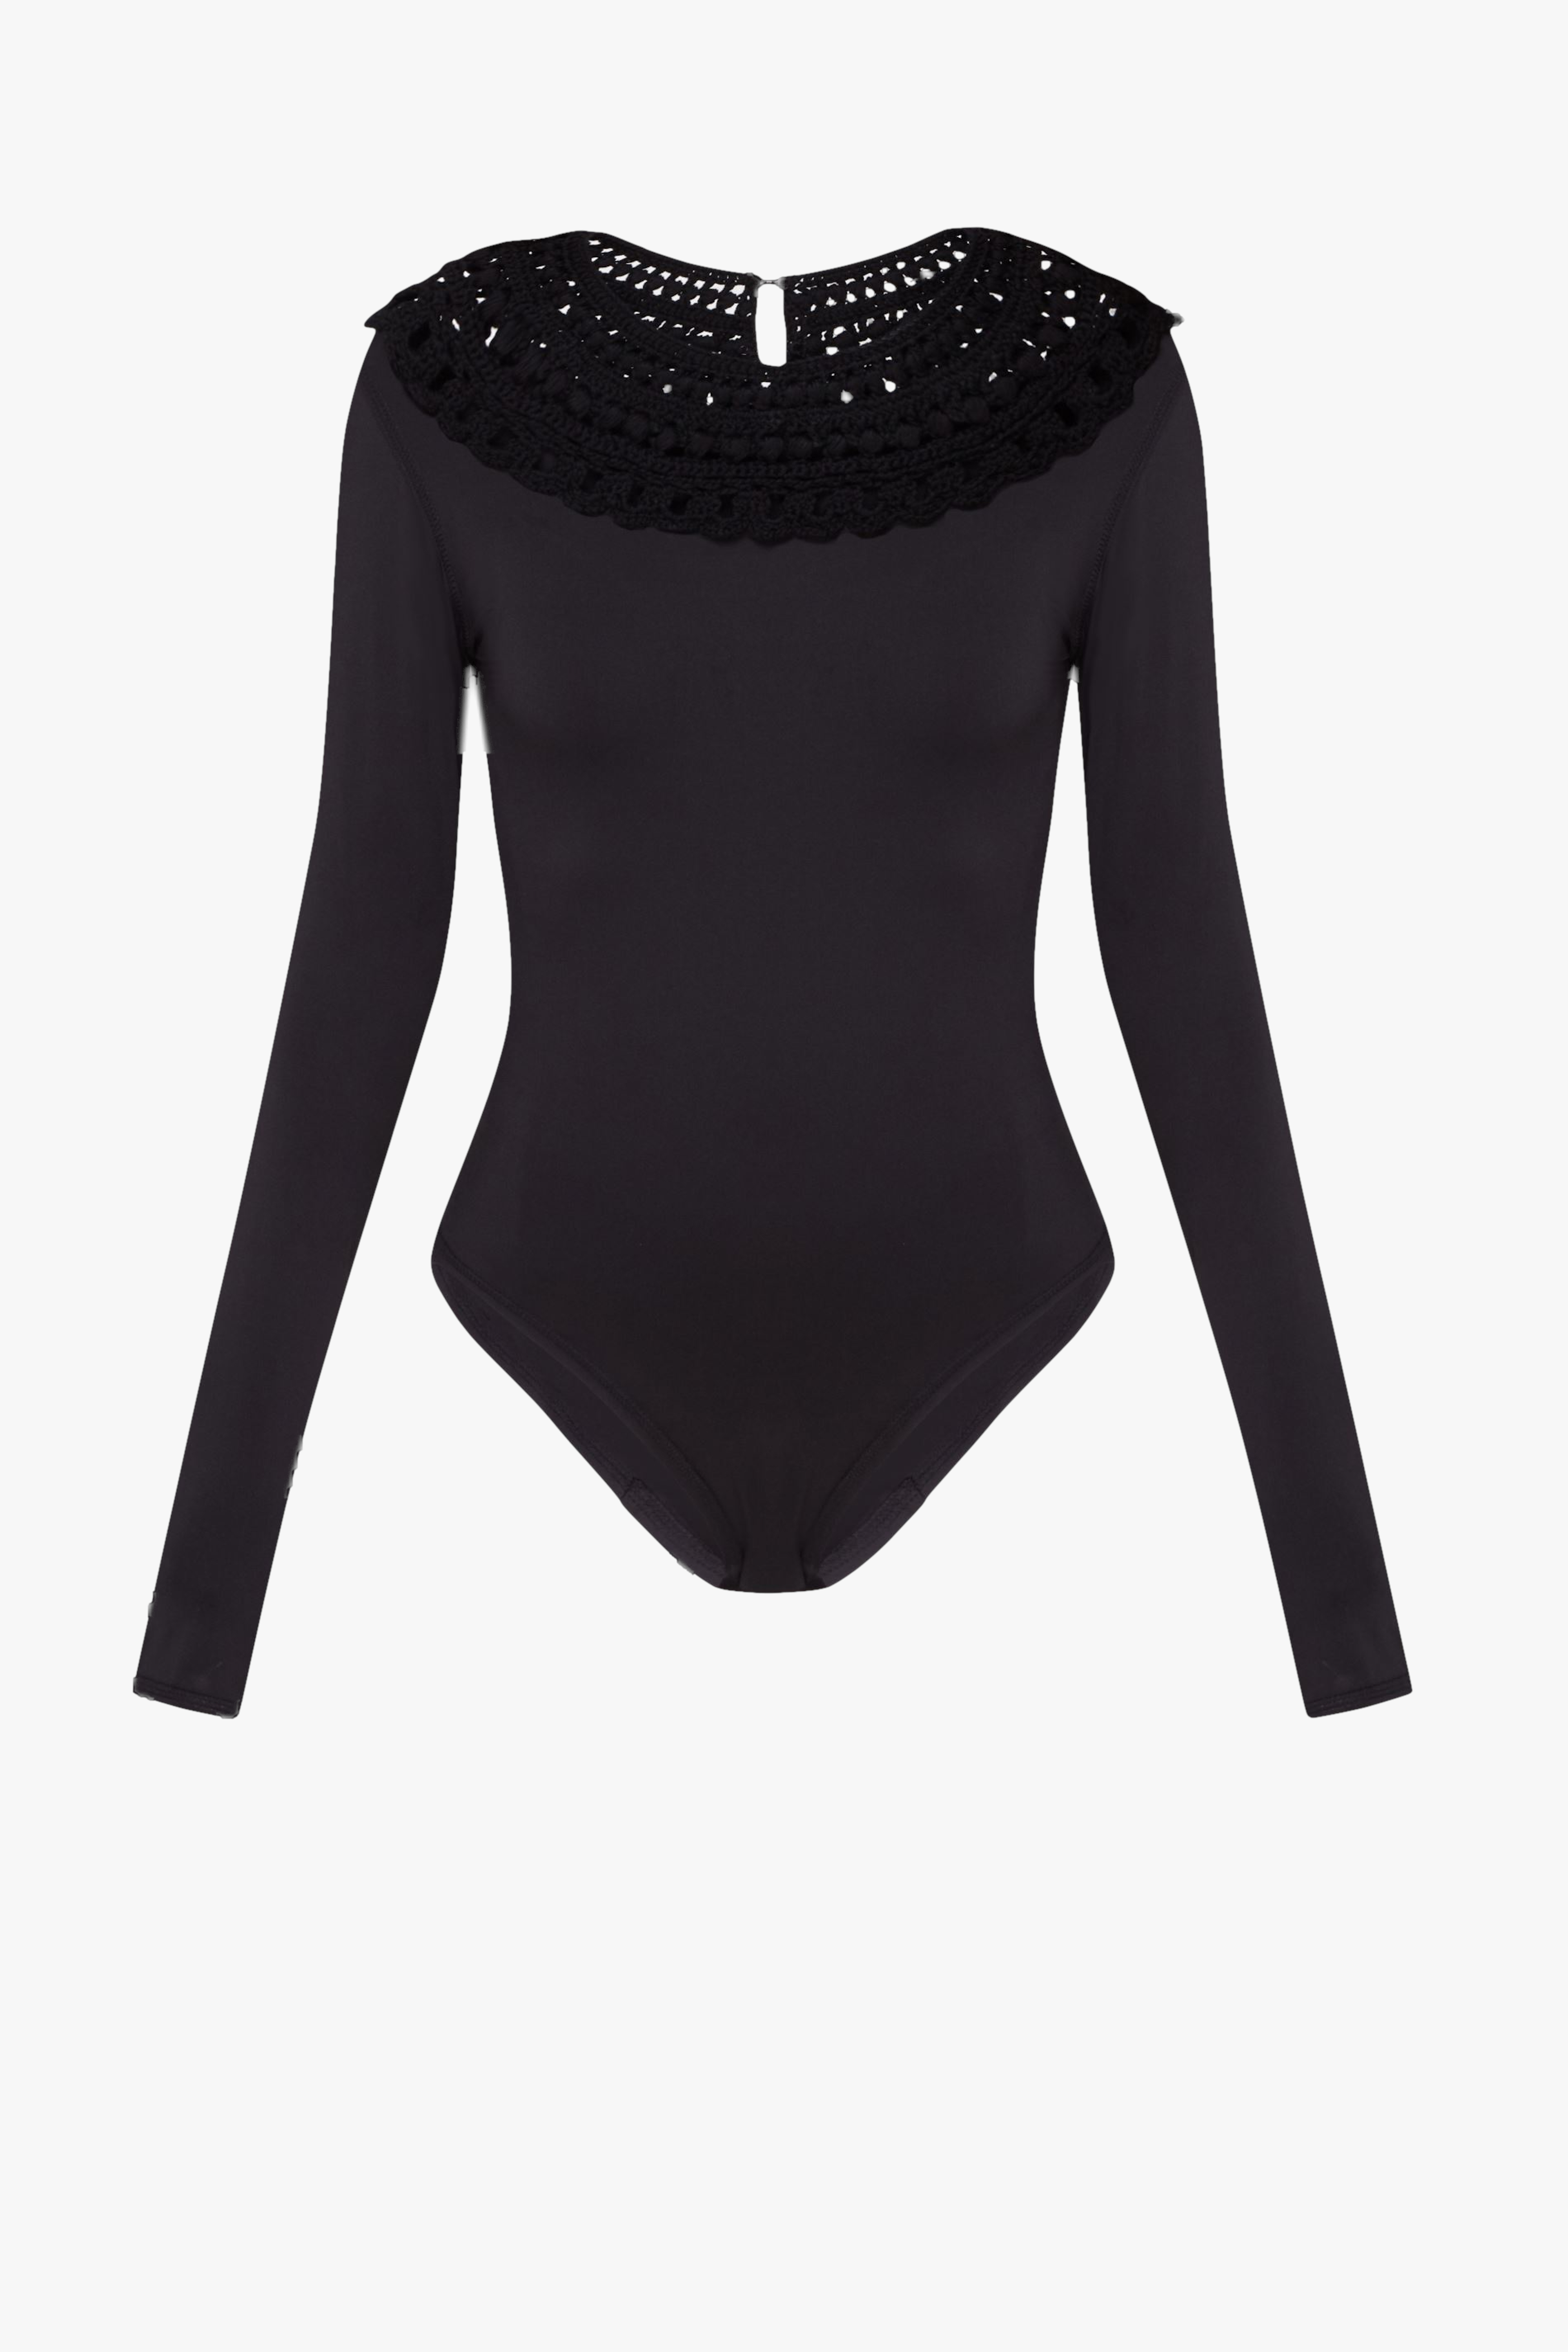 Shop Bodysuits from emerging designers